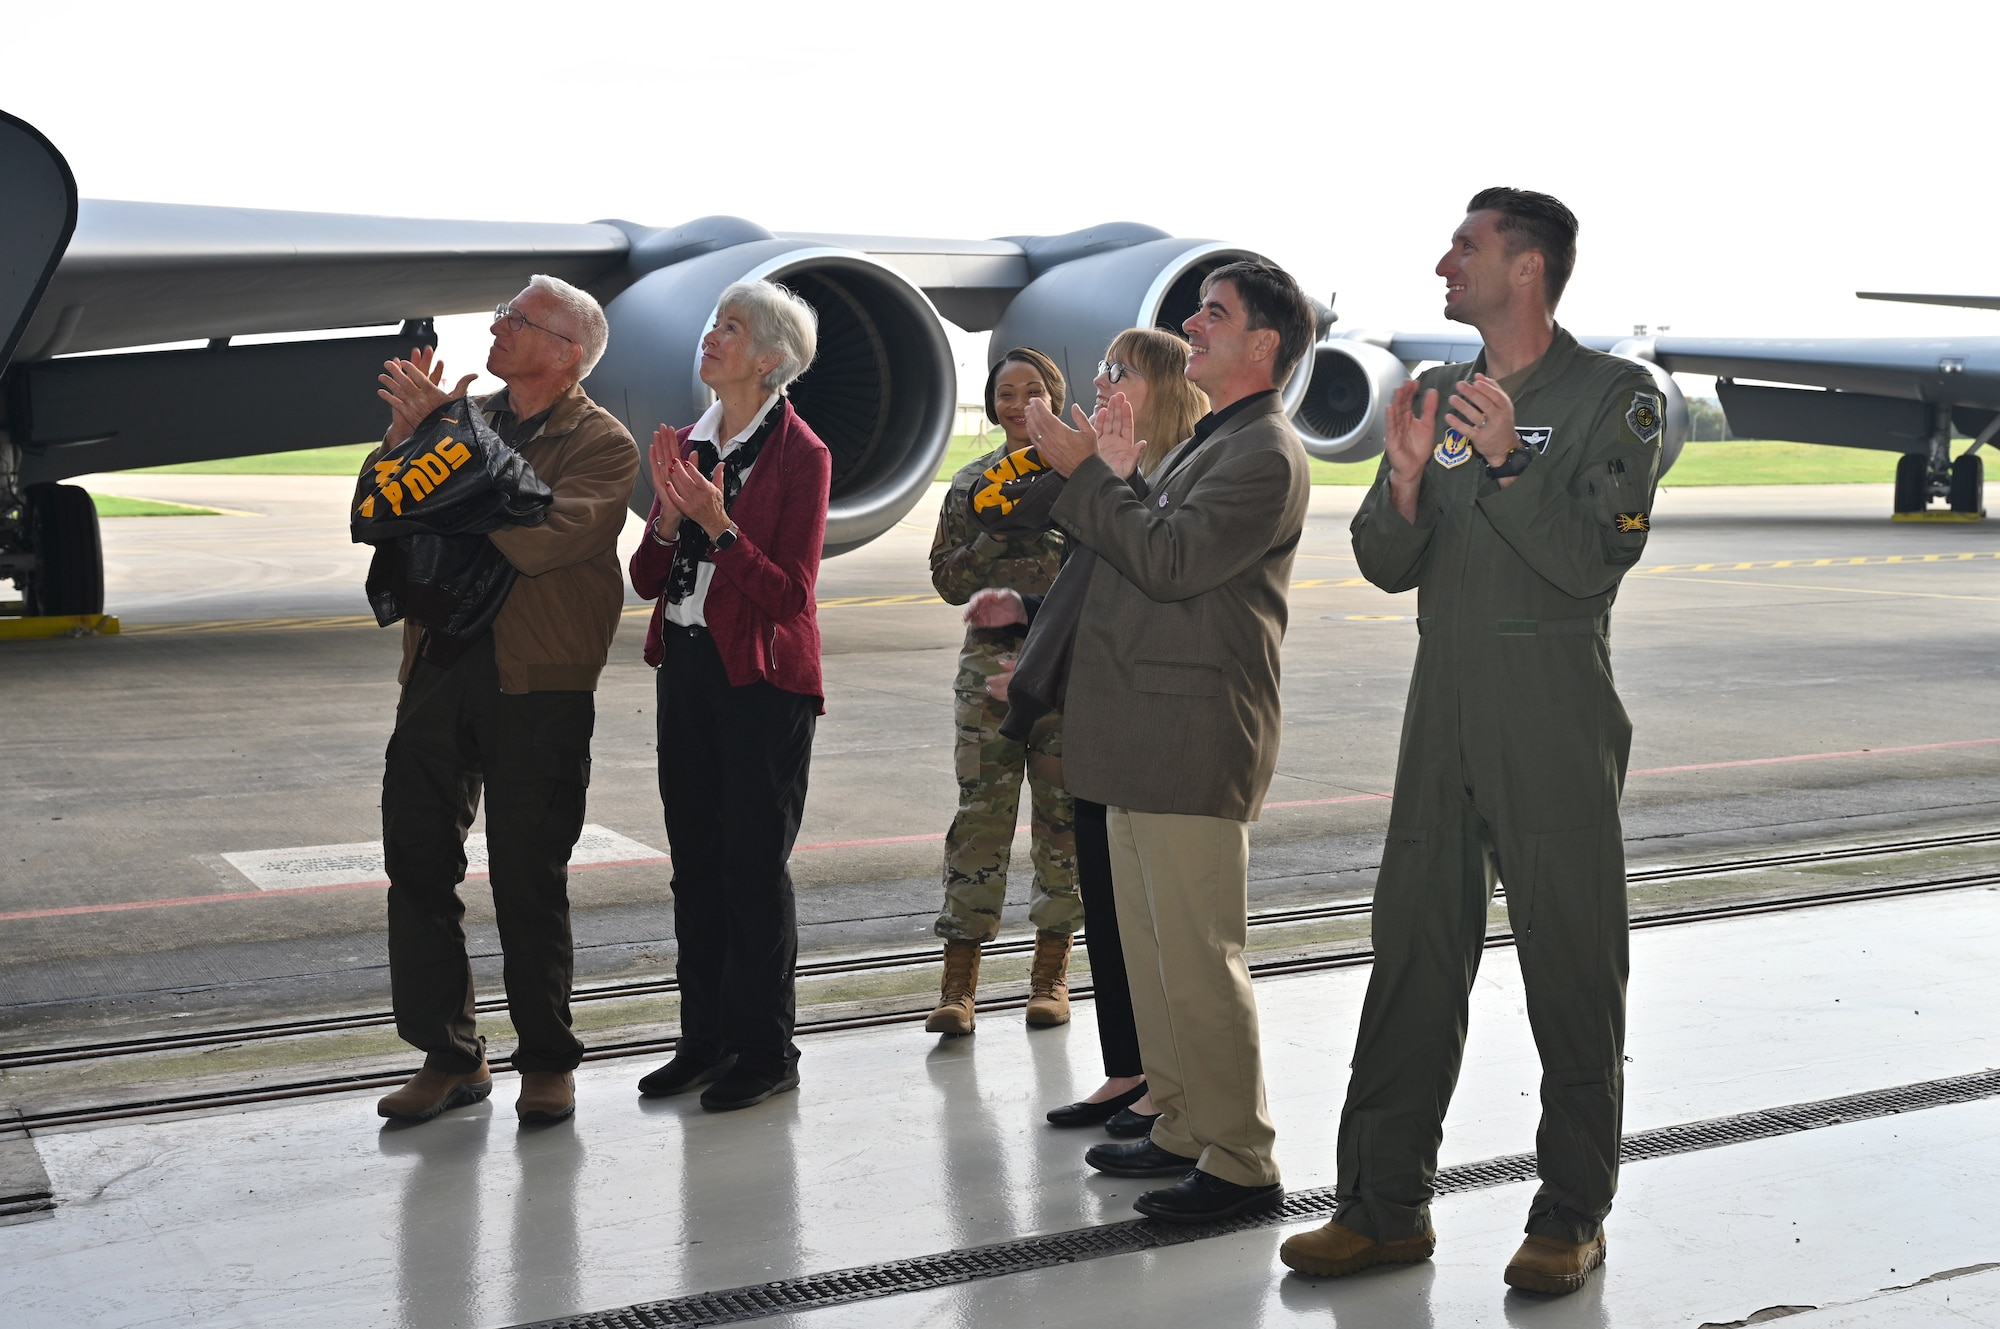 Family members of original crew members of the B-17 Flying Fortress known as “Squawkin Hawk,” assigned to the 100th Bomb Group, Thorpe Abbotts, Norfolk, during World War II, along with U.S. Air Force Chief Master Sgt. Tiffany Griego, center, 100th Air Refueling Wing command chief, and Col. Ryan Garlow, right, 100th ARW commander, look on in delight as the newest “Squawkin Hawk” nose art is unveiled Oct. 10, 2023. RAF Mildenhall’s heritage nose art honors those who served at Thorpe Abbotts during World War II, many of whom made the ultimate sacrifice. (U.S. Air Force photo by Karen Abeyasekere)